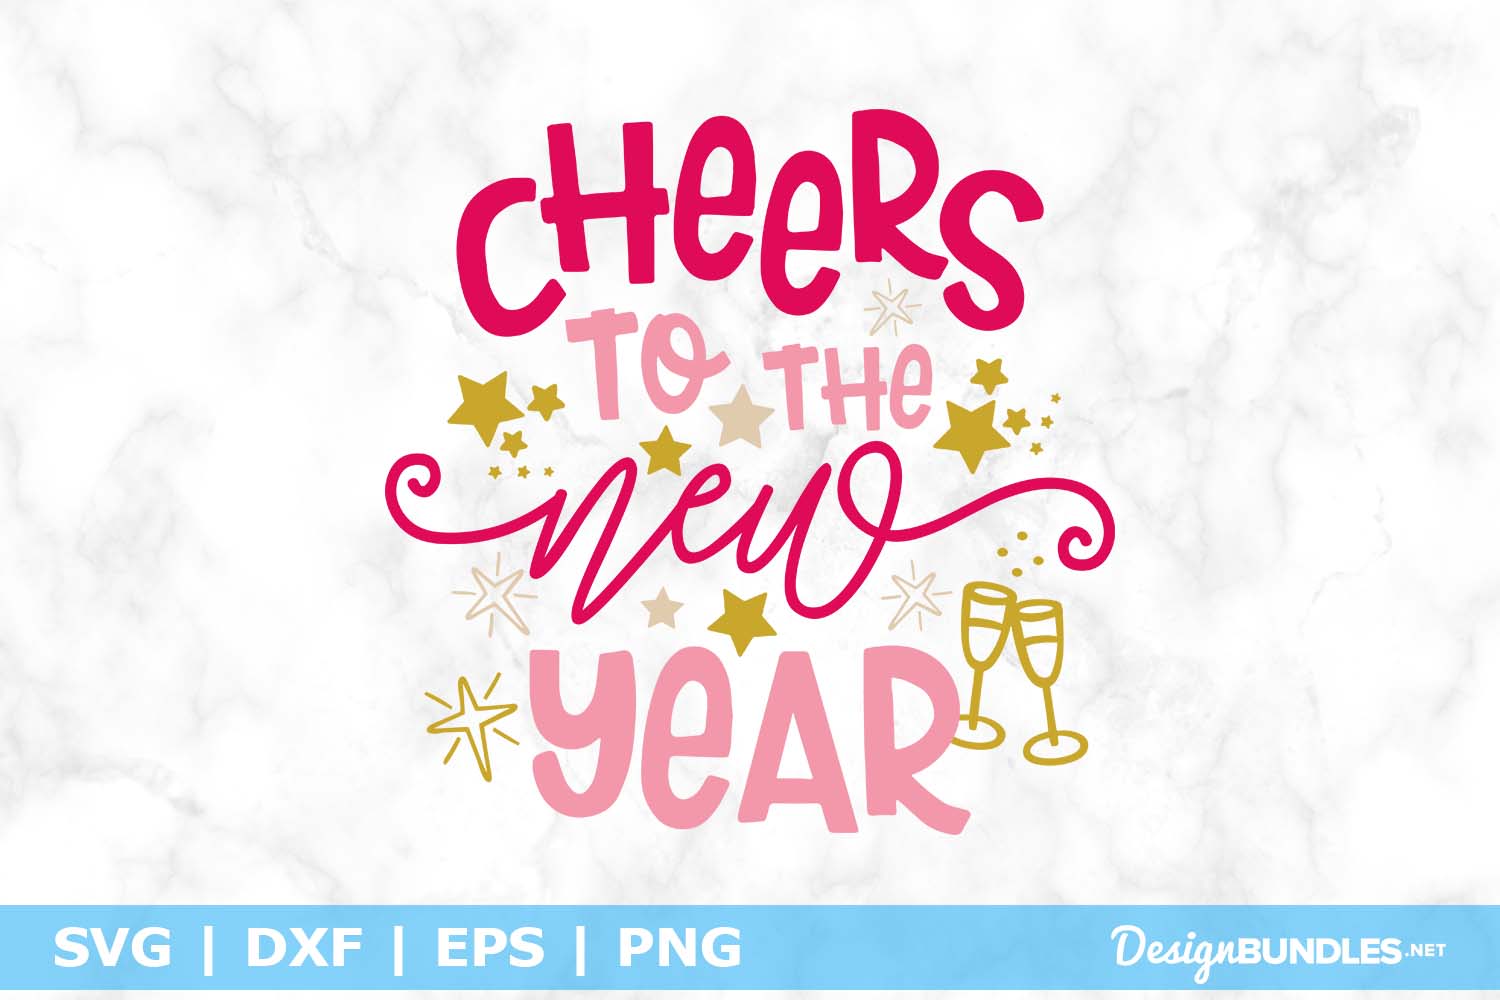 Cheers To The New Year SVG File